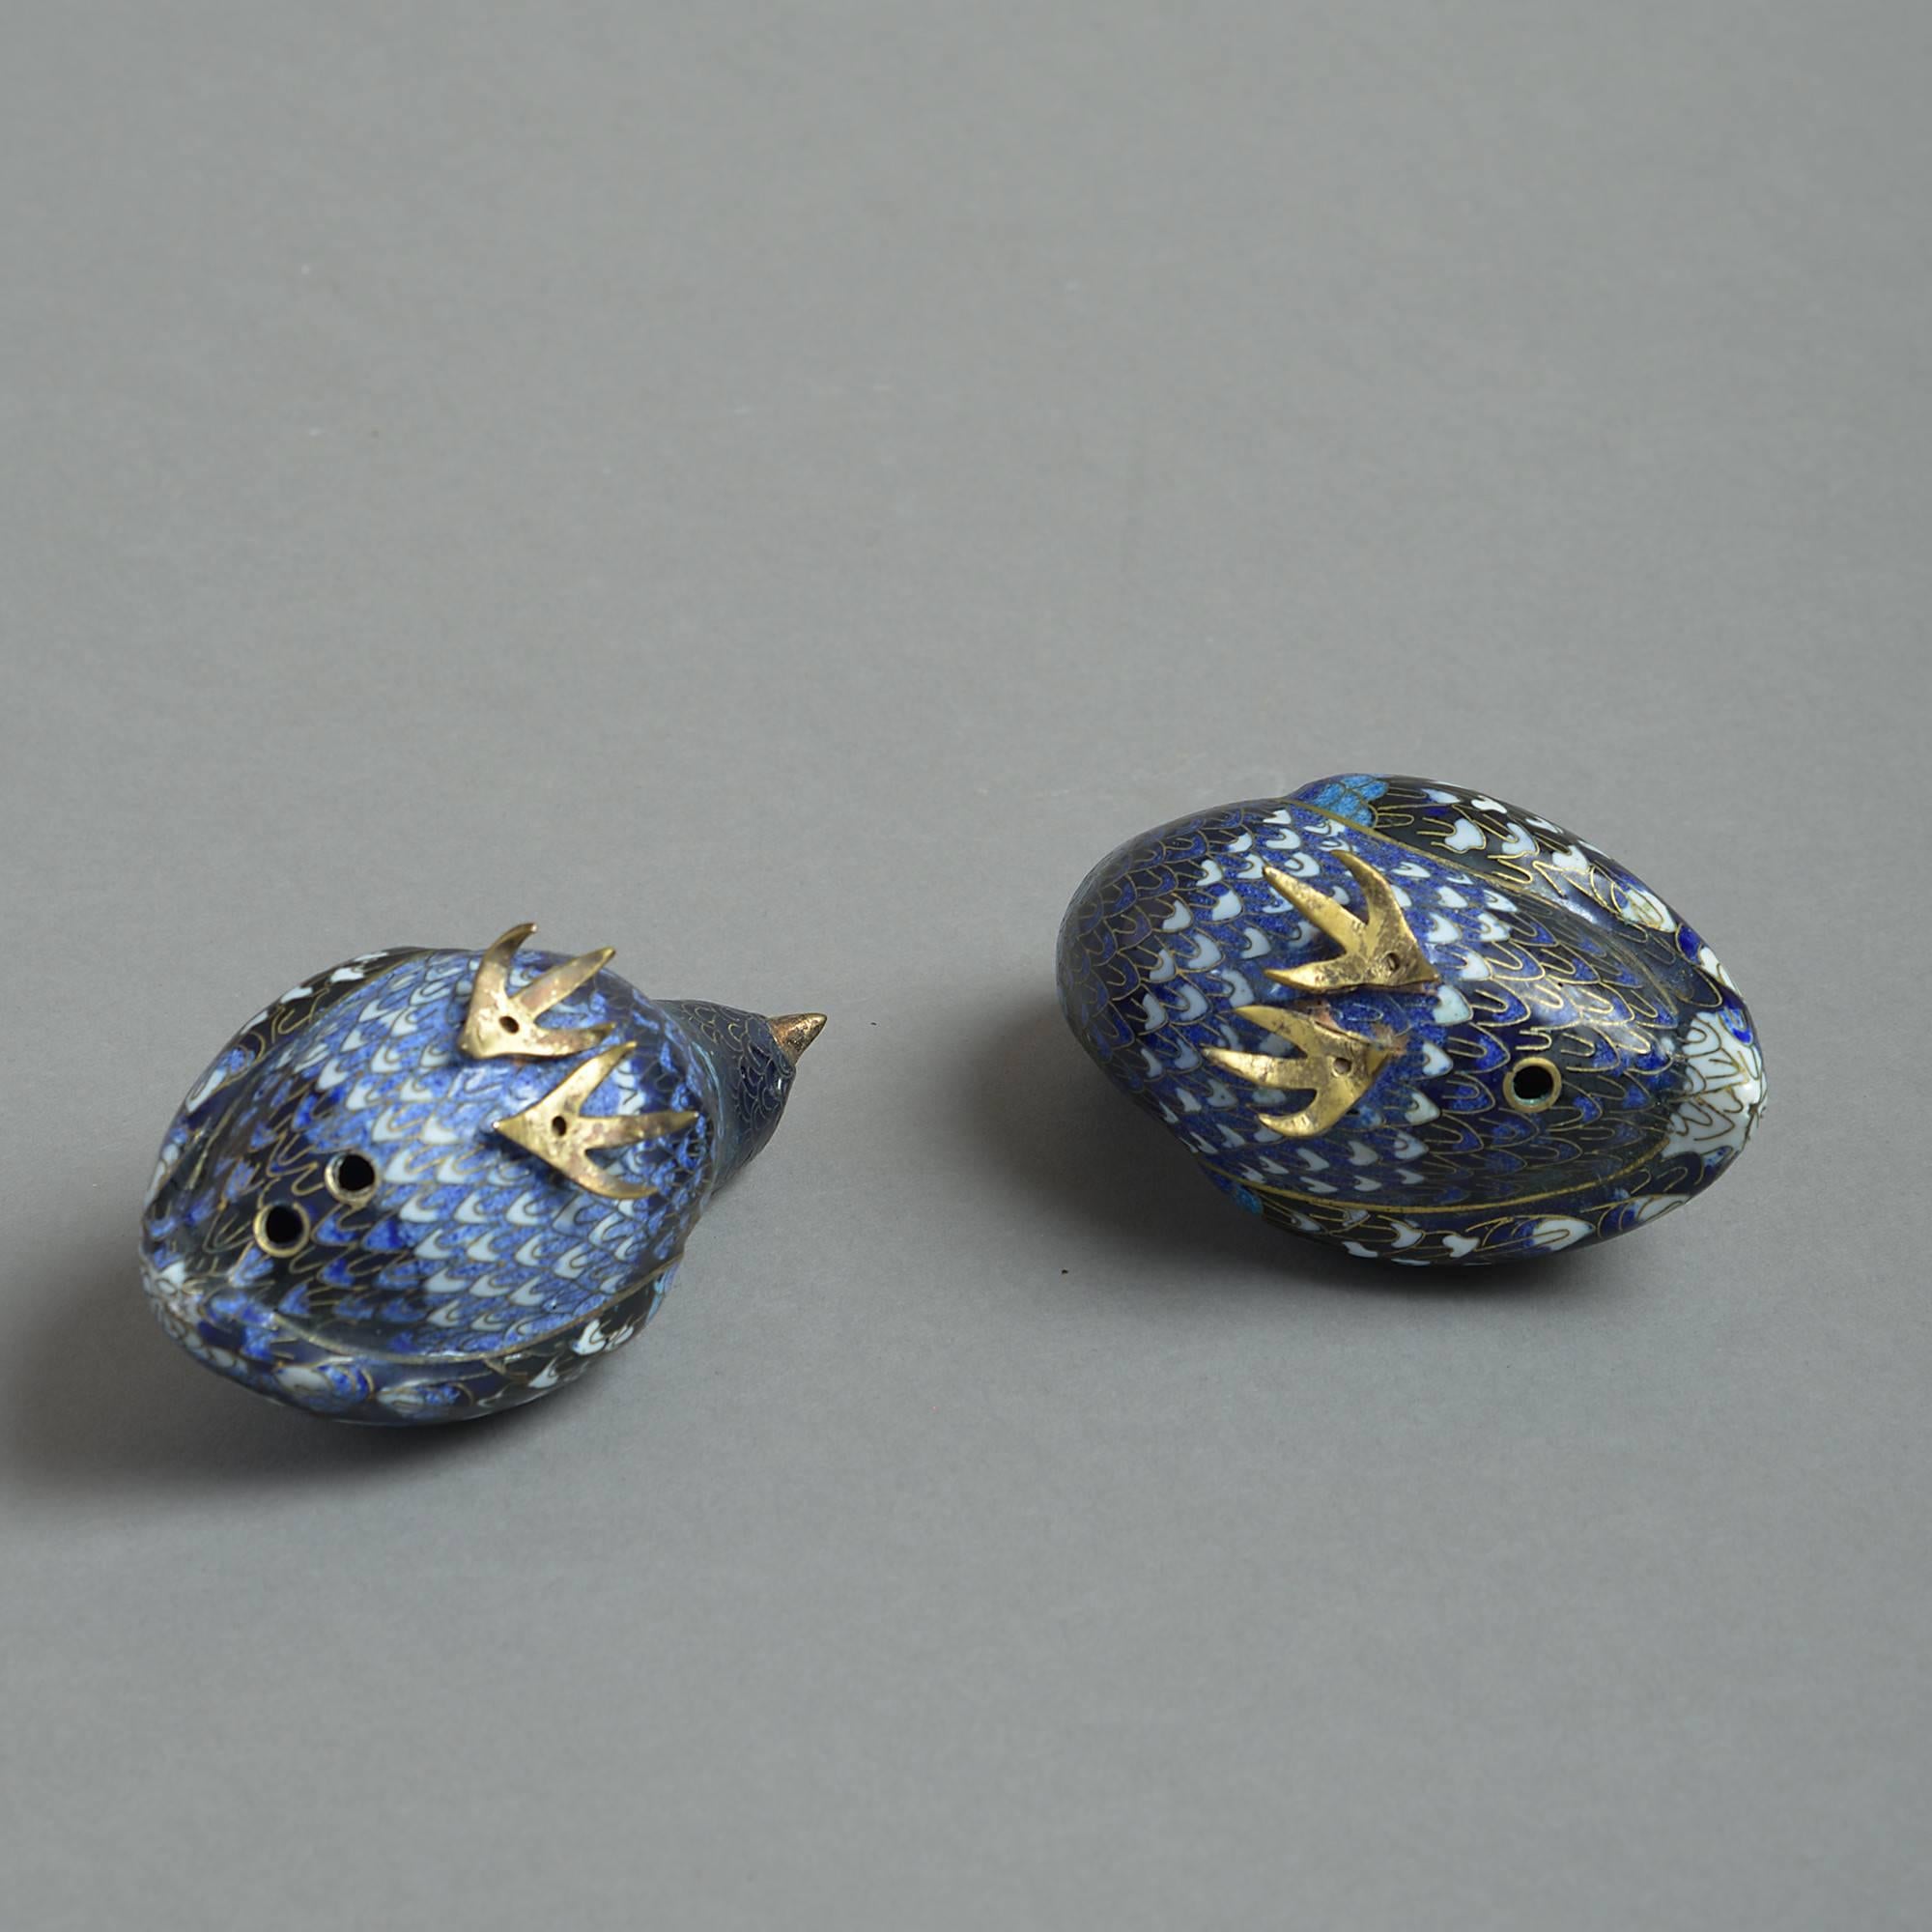 A pair of early 20th century Republic period cloisonné quail, modelled in the traditional manner and having blue, black and white enamels with brass beaks and feet.